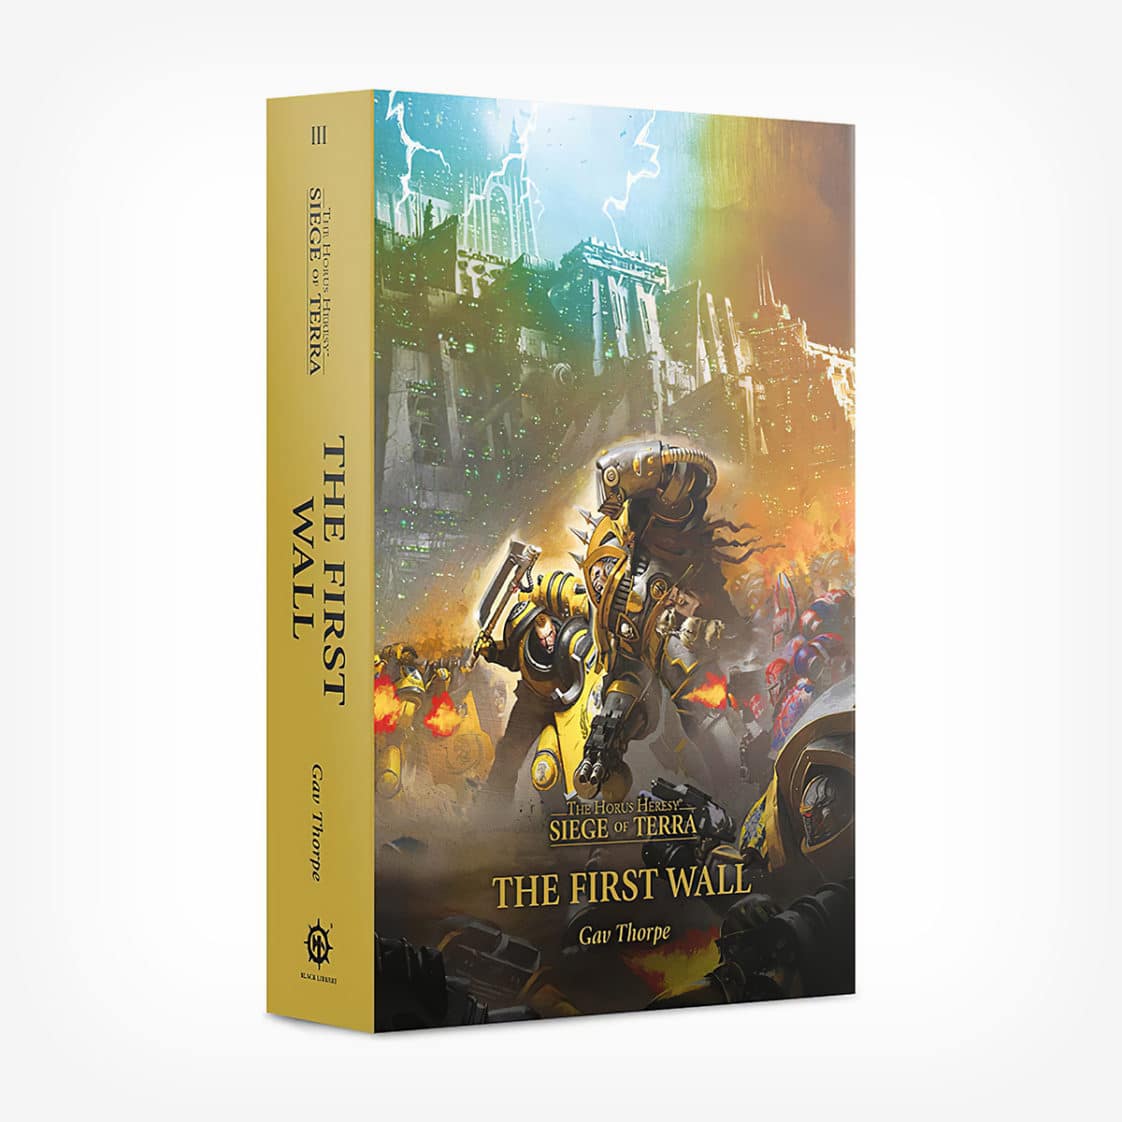 Horus Heresy: The First Wall (HB)